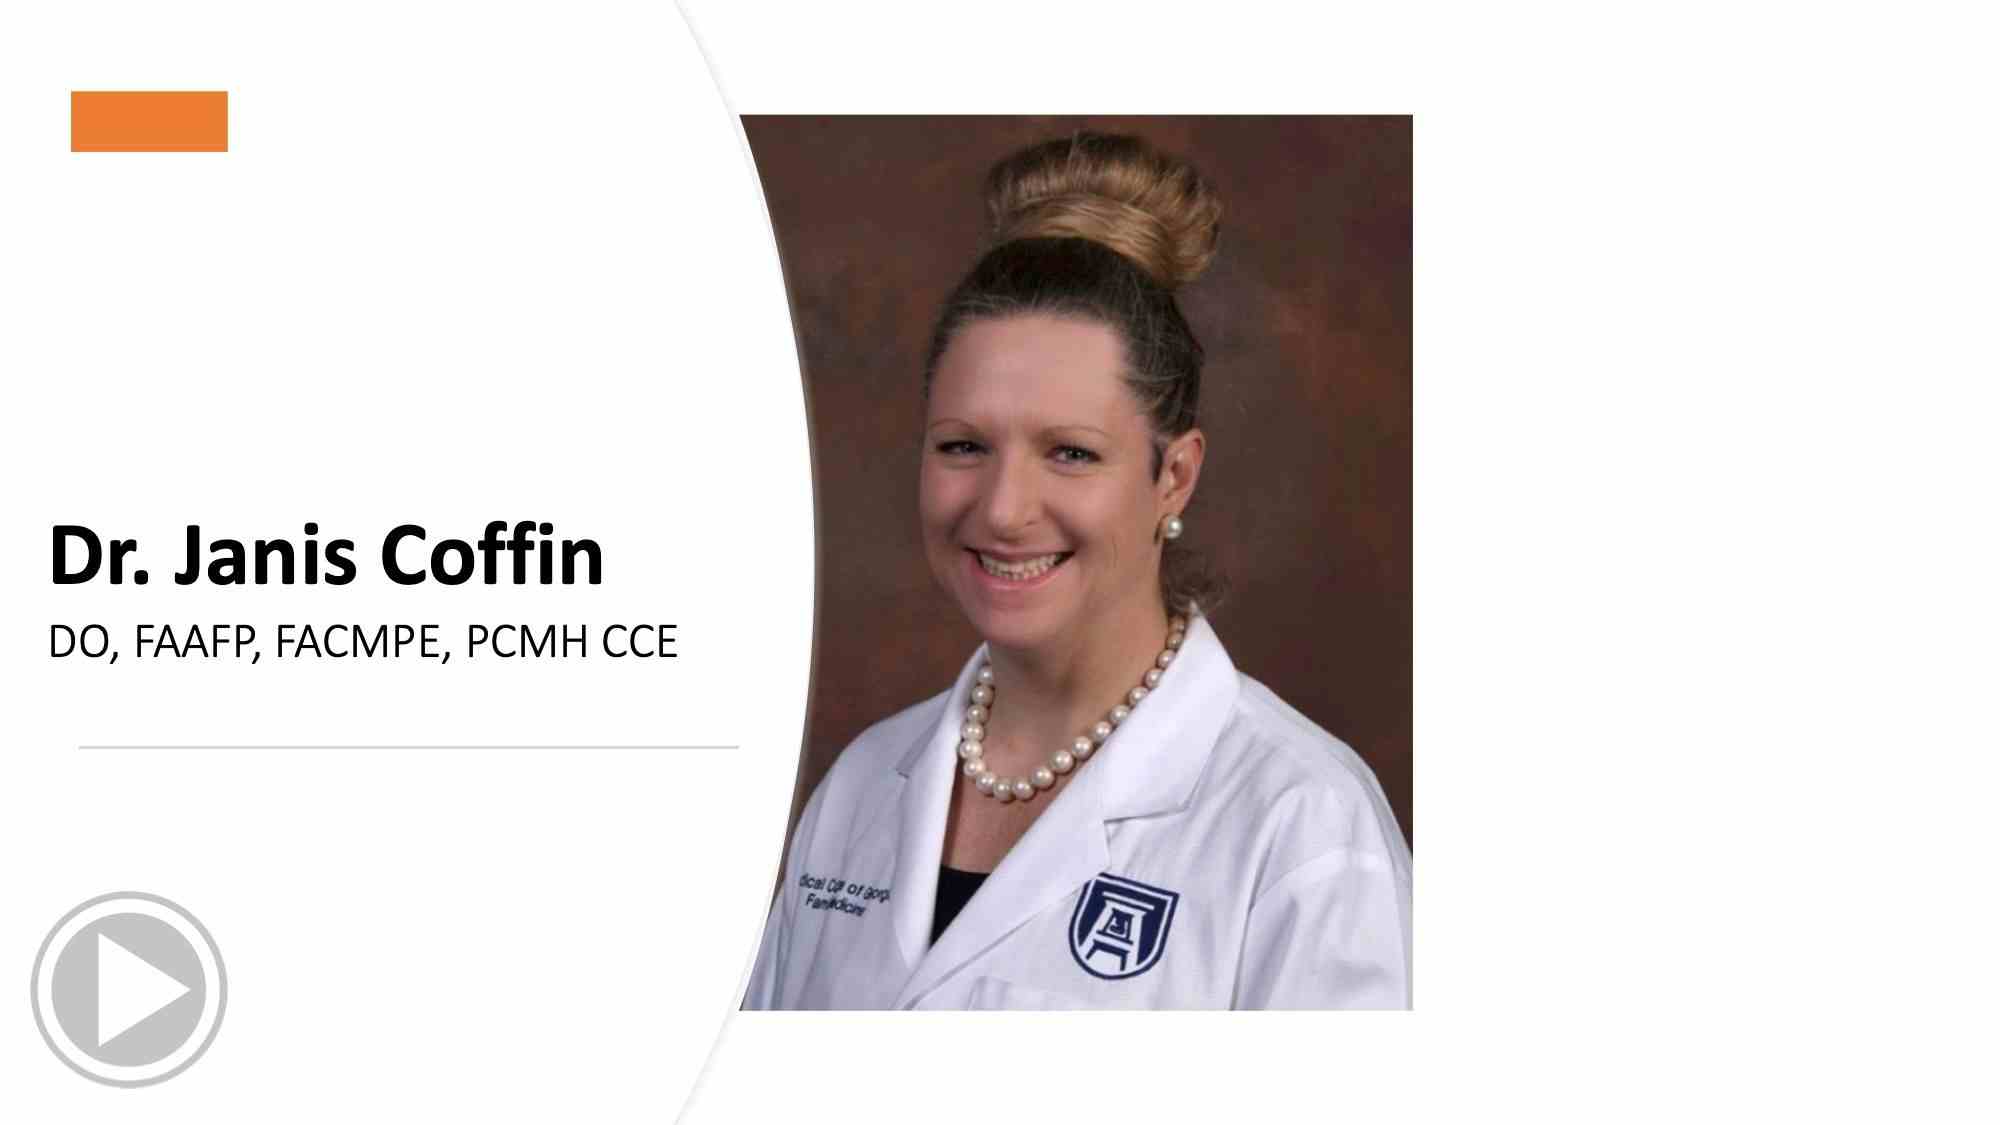 Dr. Janis Coffin gives expert advice